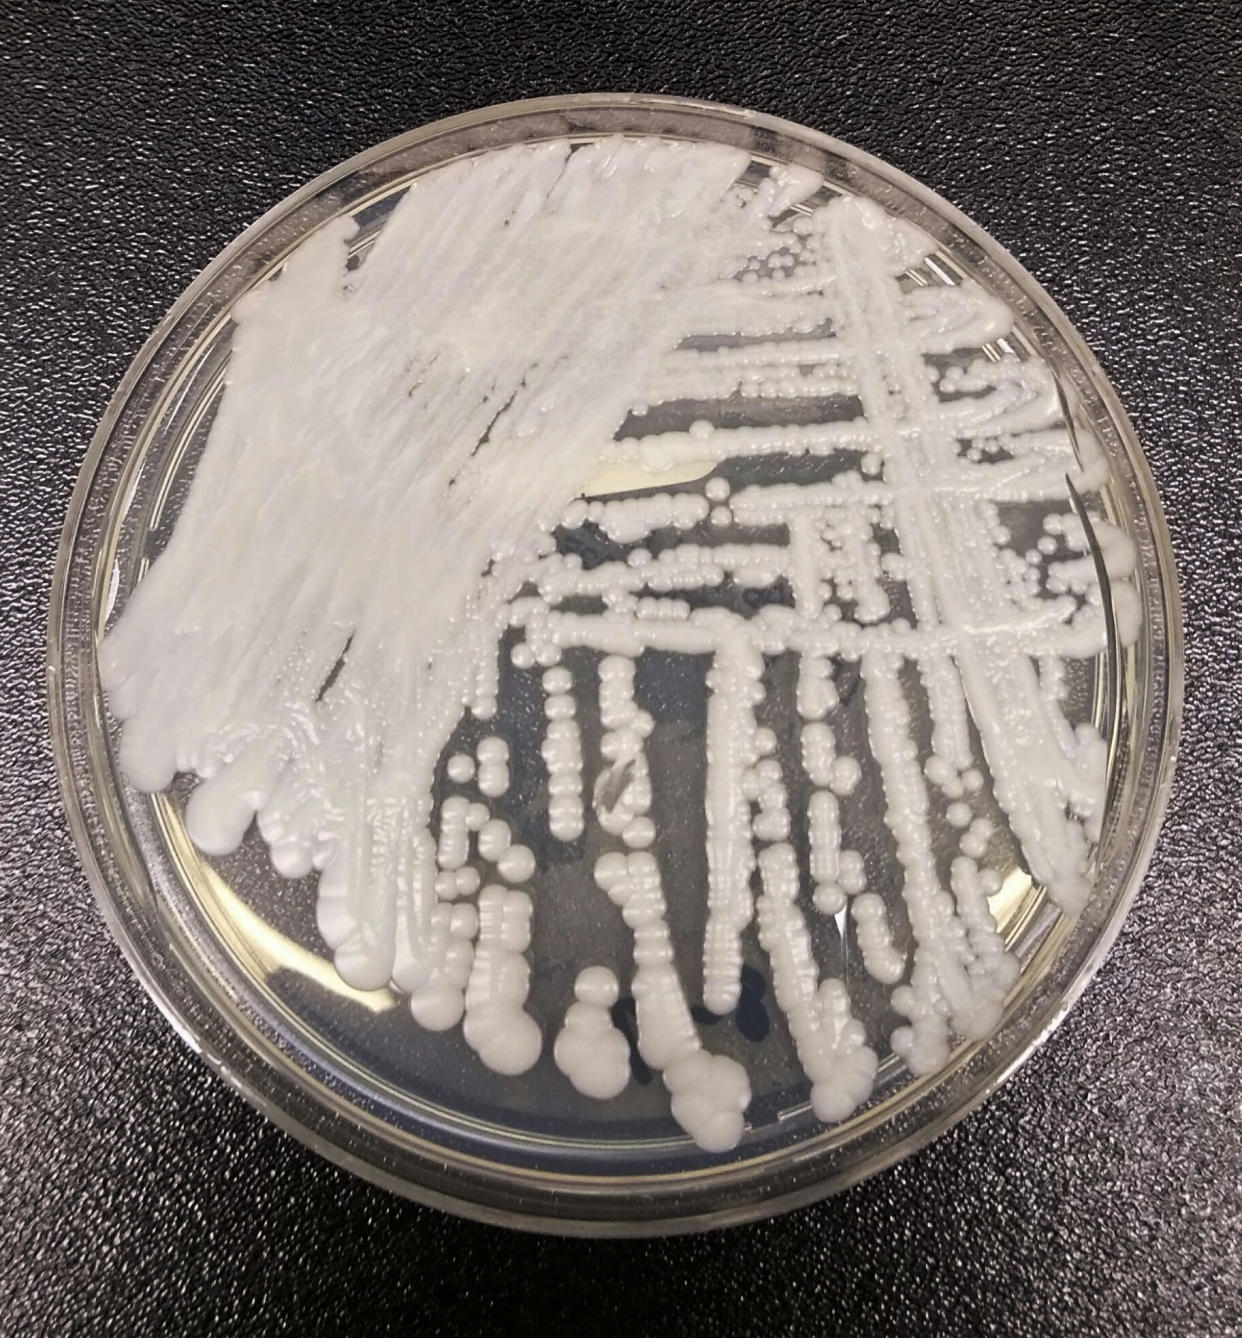 fungal FILE - This undated photo made available by the Centers for Disease Control and Prevention shows a strain of Candida auris cultured in a petri dish at a CDC laboratory. The U.S. toll of drug-resistant â€œsuperbugâ€ infections worsened during the first year of the COVID-19 pandemic, health officials said Tuesday, July 12, 2022. After years of decline, the nation in 2020 saw a 15% increase in hospital infections and deaths attributed to some of the most worrisome bacterial infections out there, according to a Centers for Disease Control and Prevention report. (Shawn Lockhart/Centers for Disease Control and Prevention via AP, File)